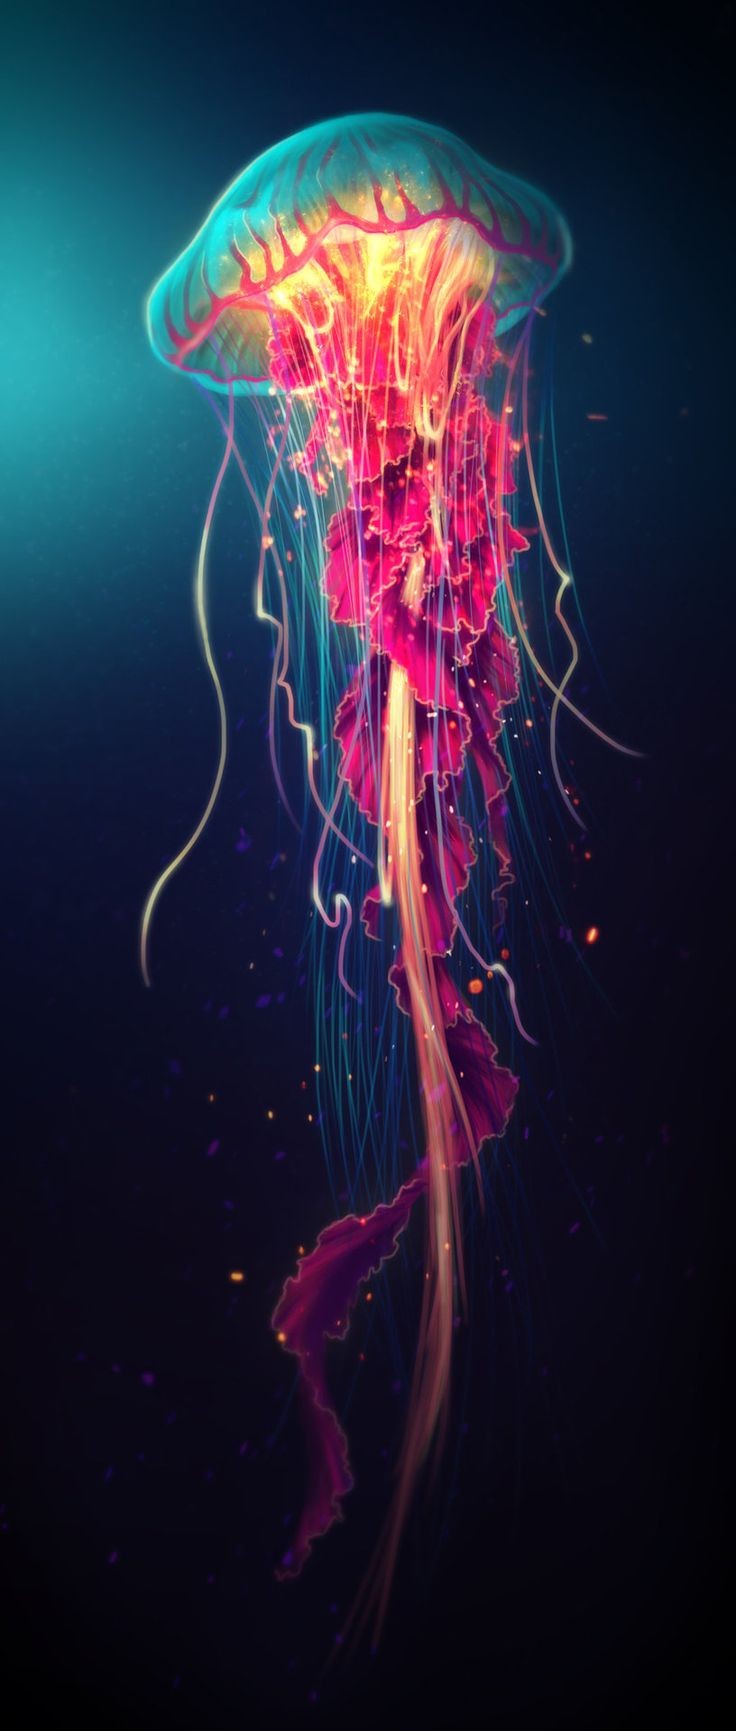 Jellyfish by shobey1kanoby | re-pin | follow me on...